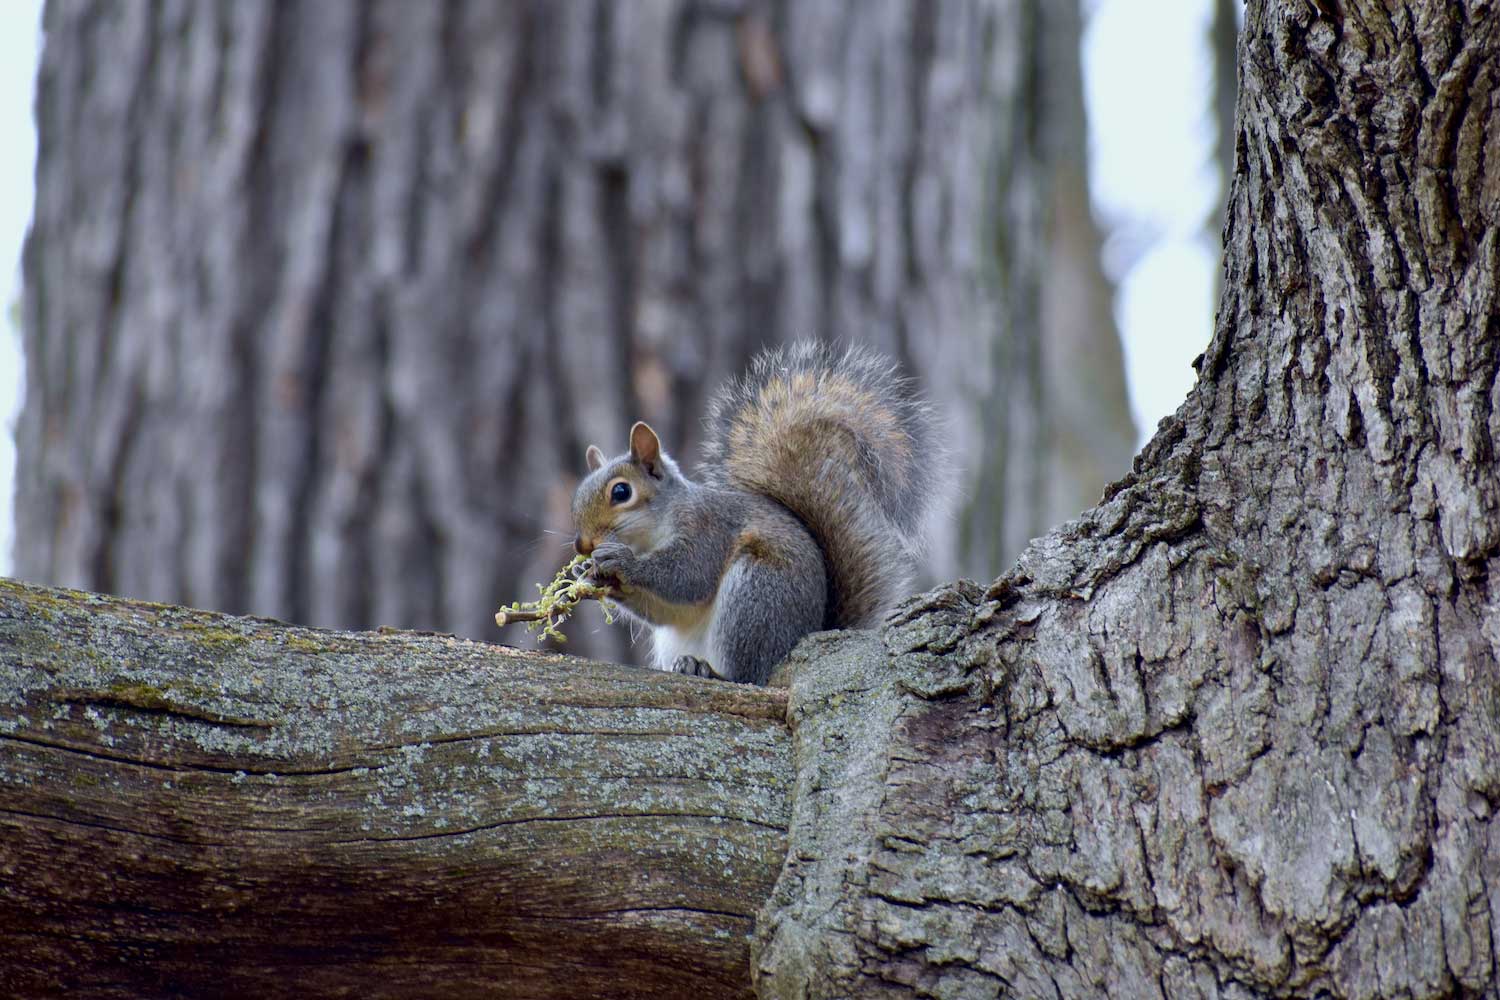 A gray squirrel eating vegetation while sitting on a large tree branch.